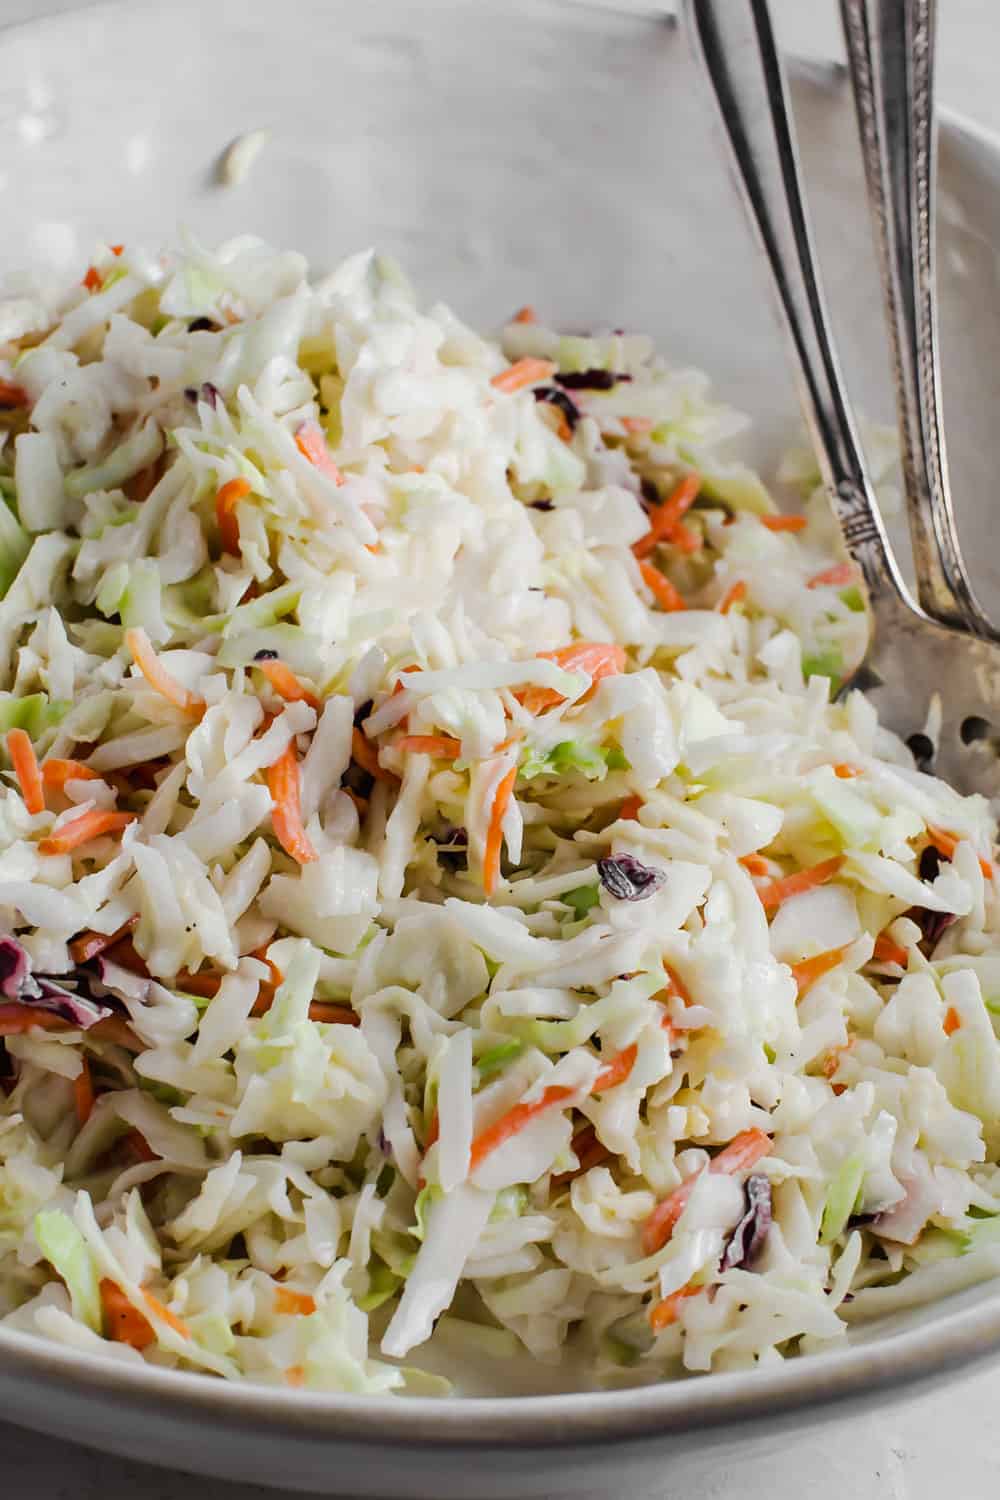 how long can you keep kfc coleslaw in refrigerator?